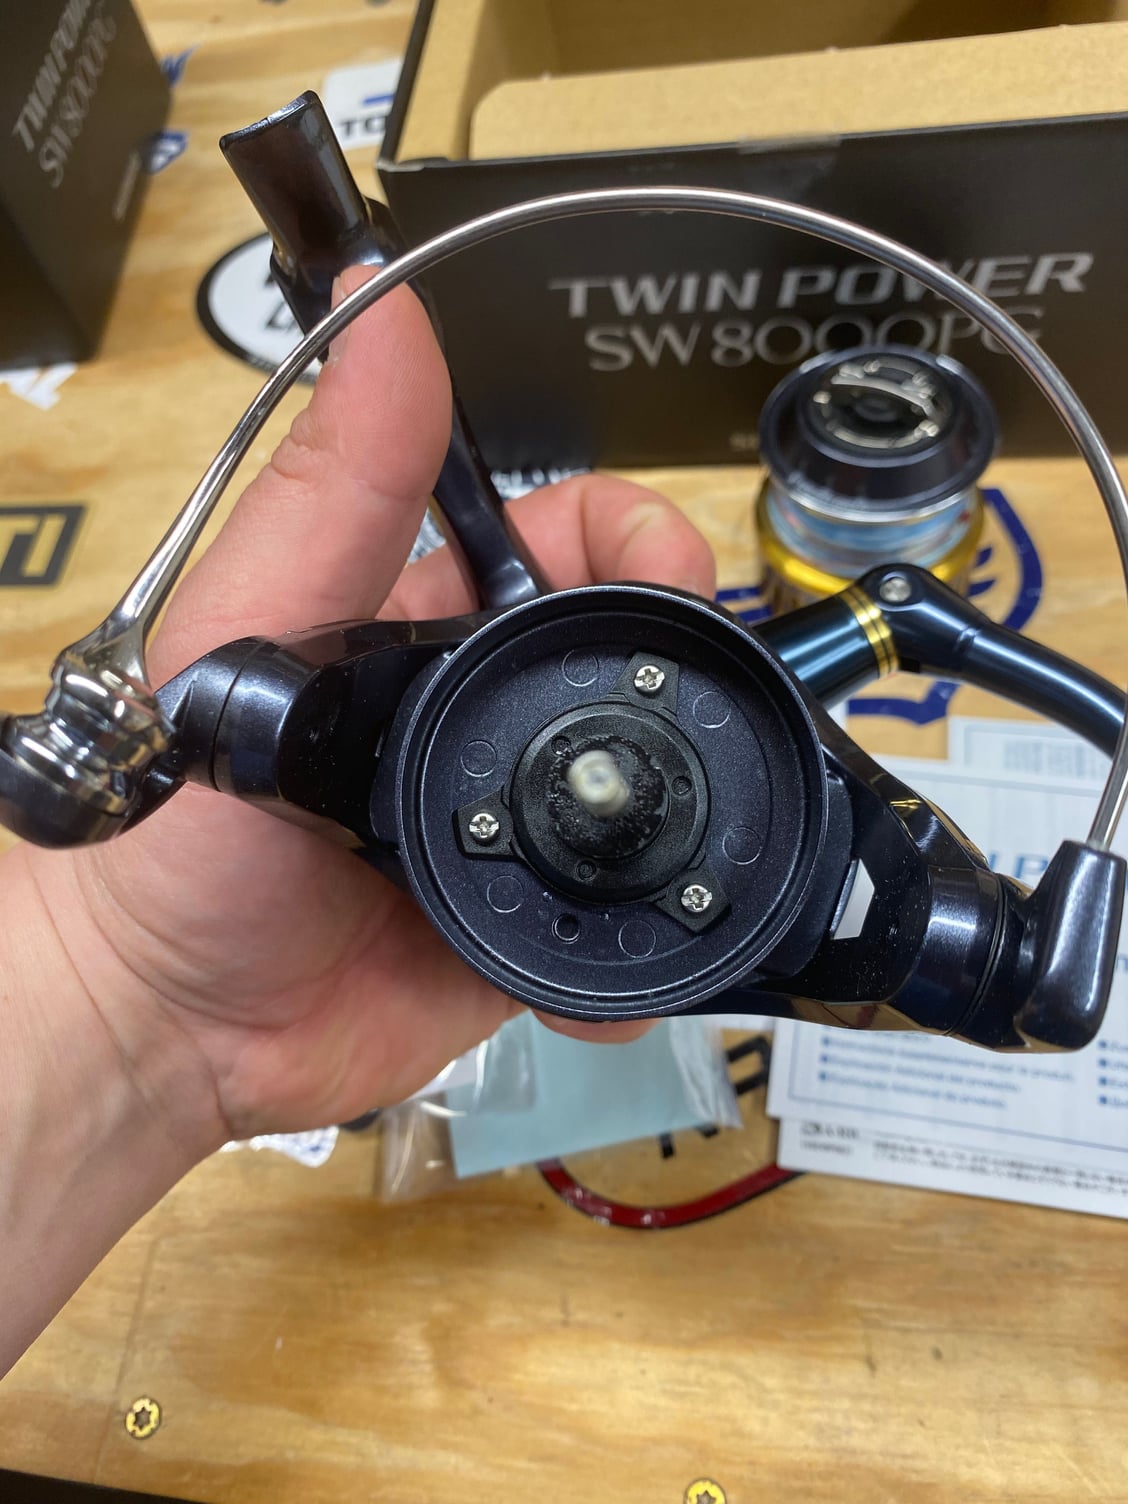 2 shimano twinpower 8000 for sale - The Hull Truth - Boating and Fishing  Forum